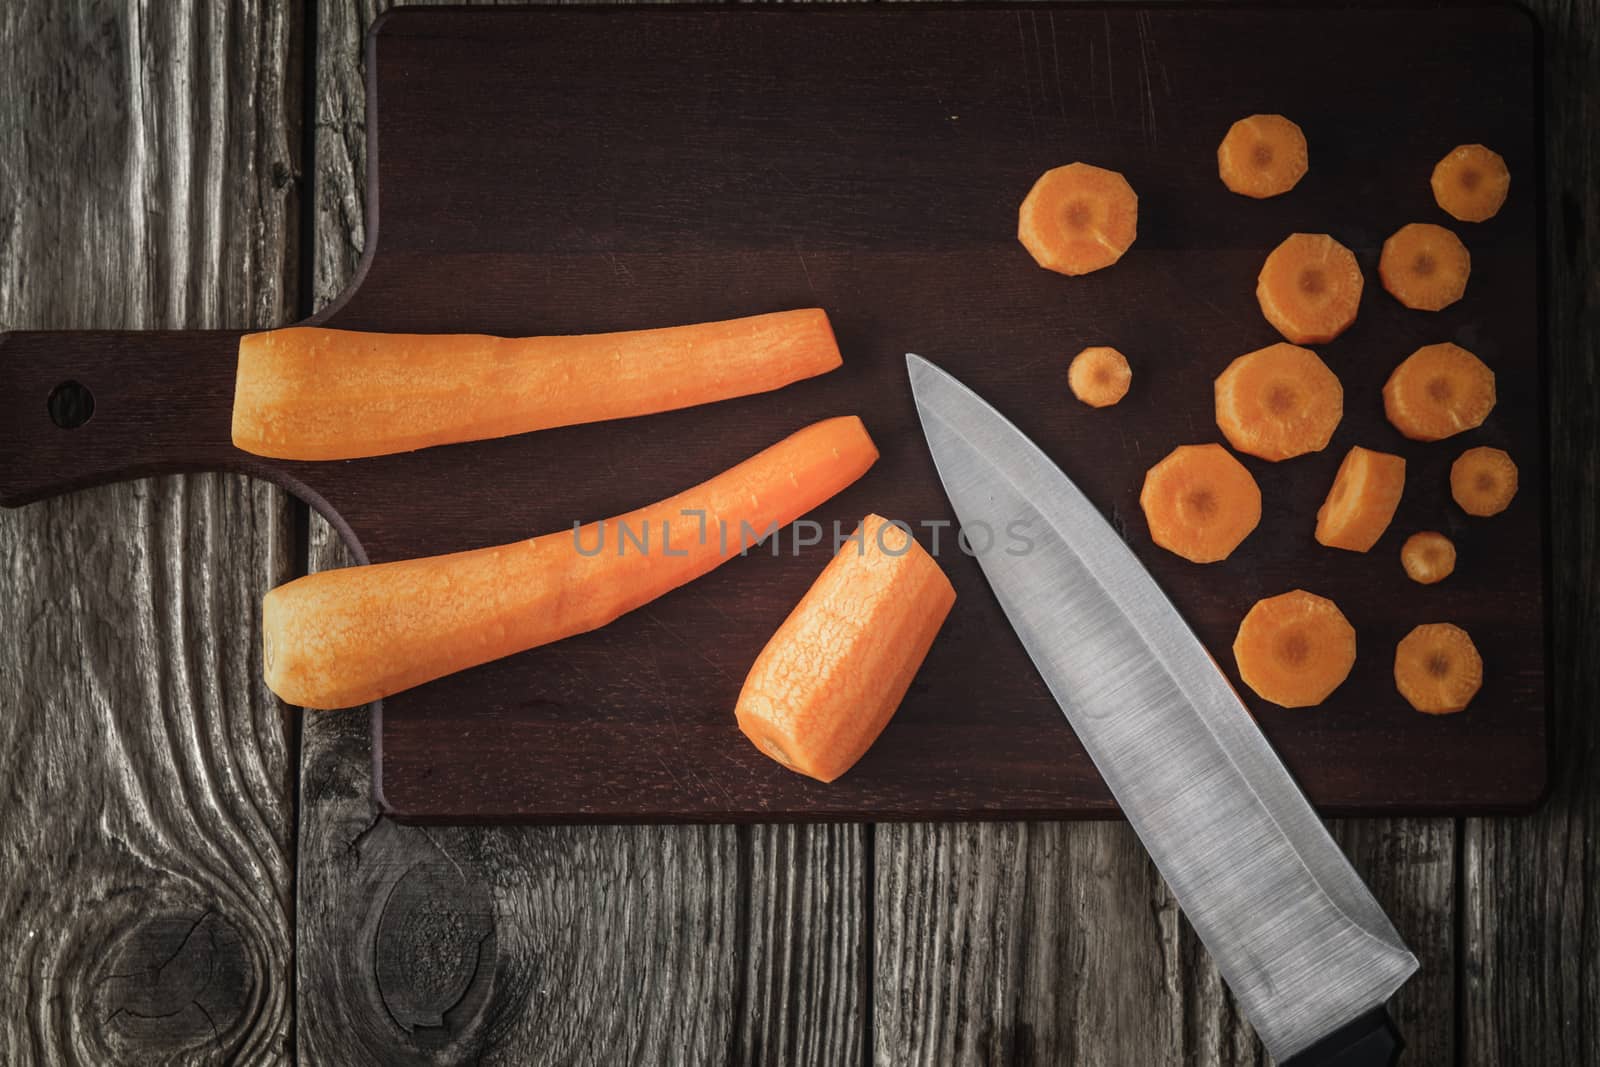 Cutting carrots on the wooden board top view by Deniskarpenkov